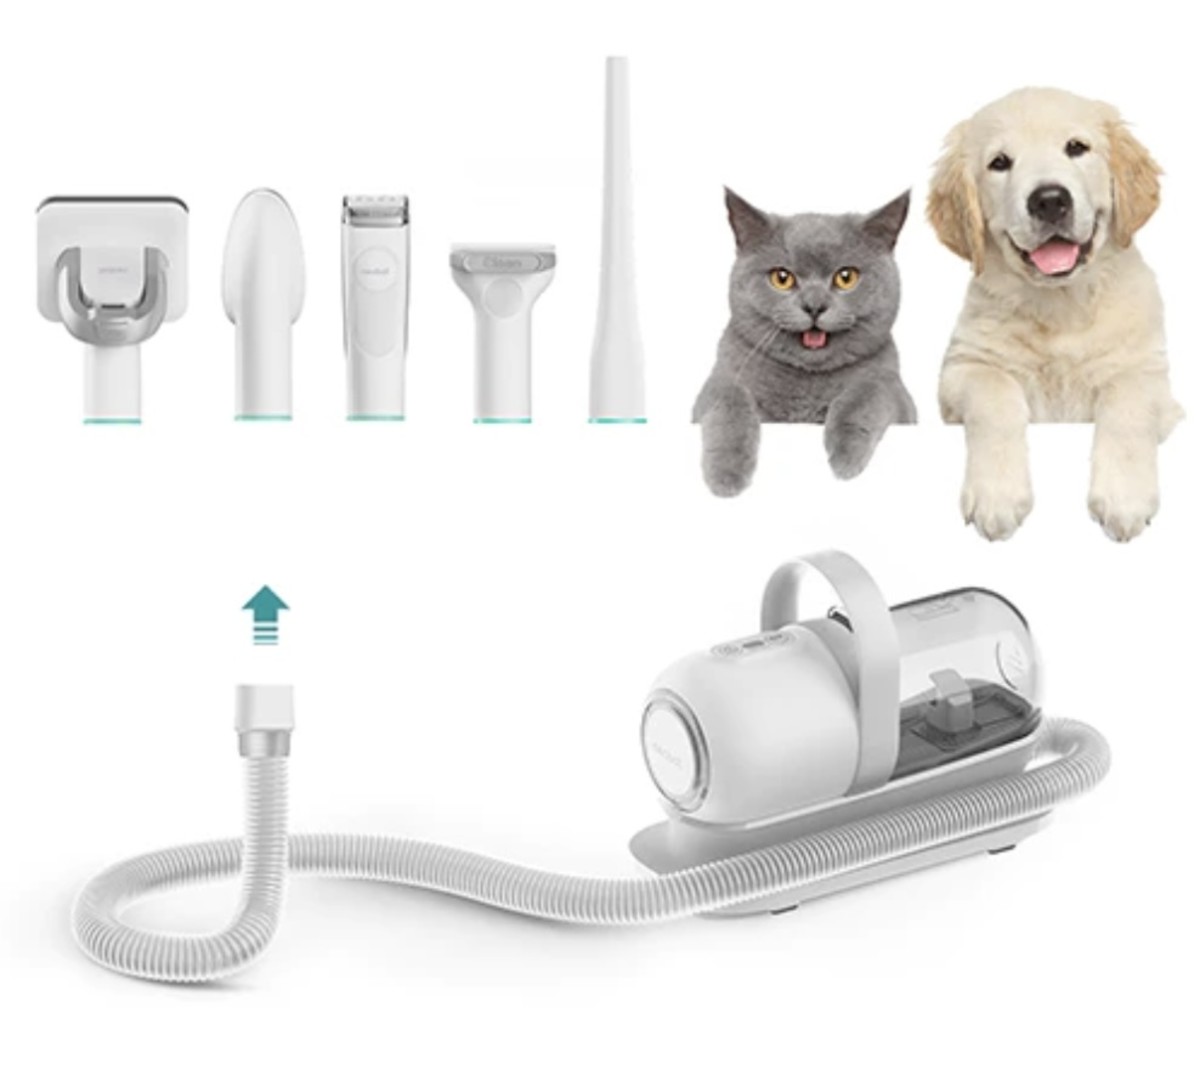 The Neabot P1 Pro Pet Grooming Kit Makes It Easy to Groom Your Pet